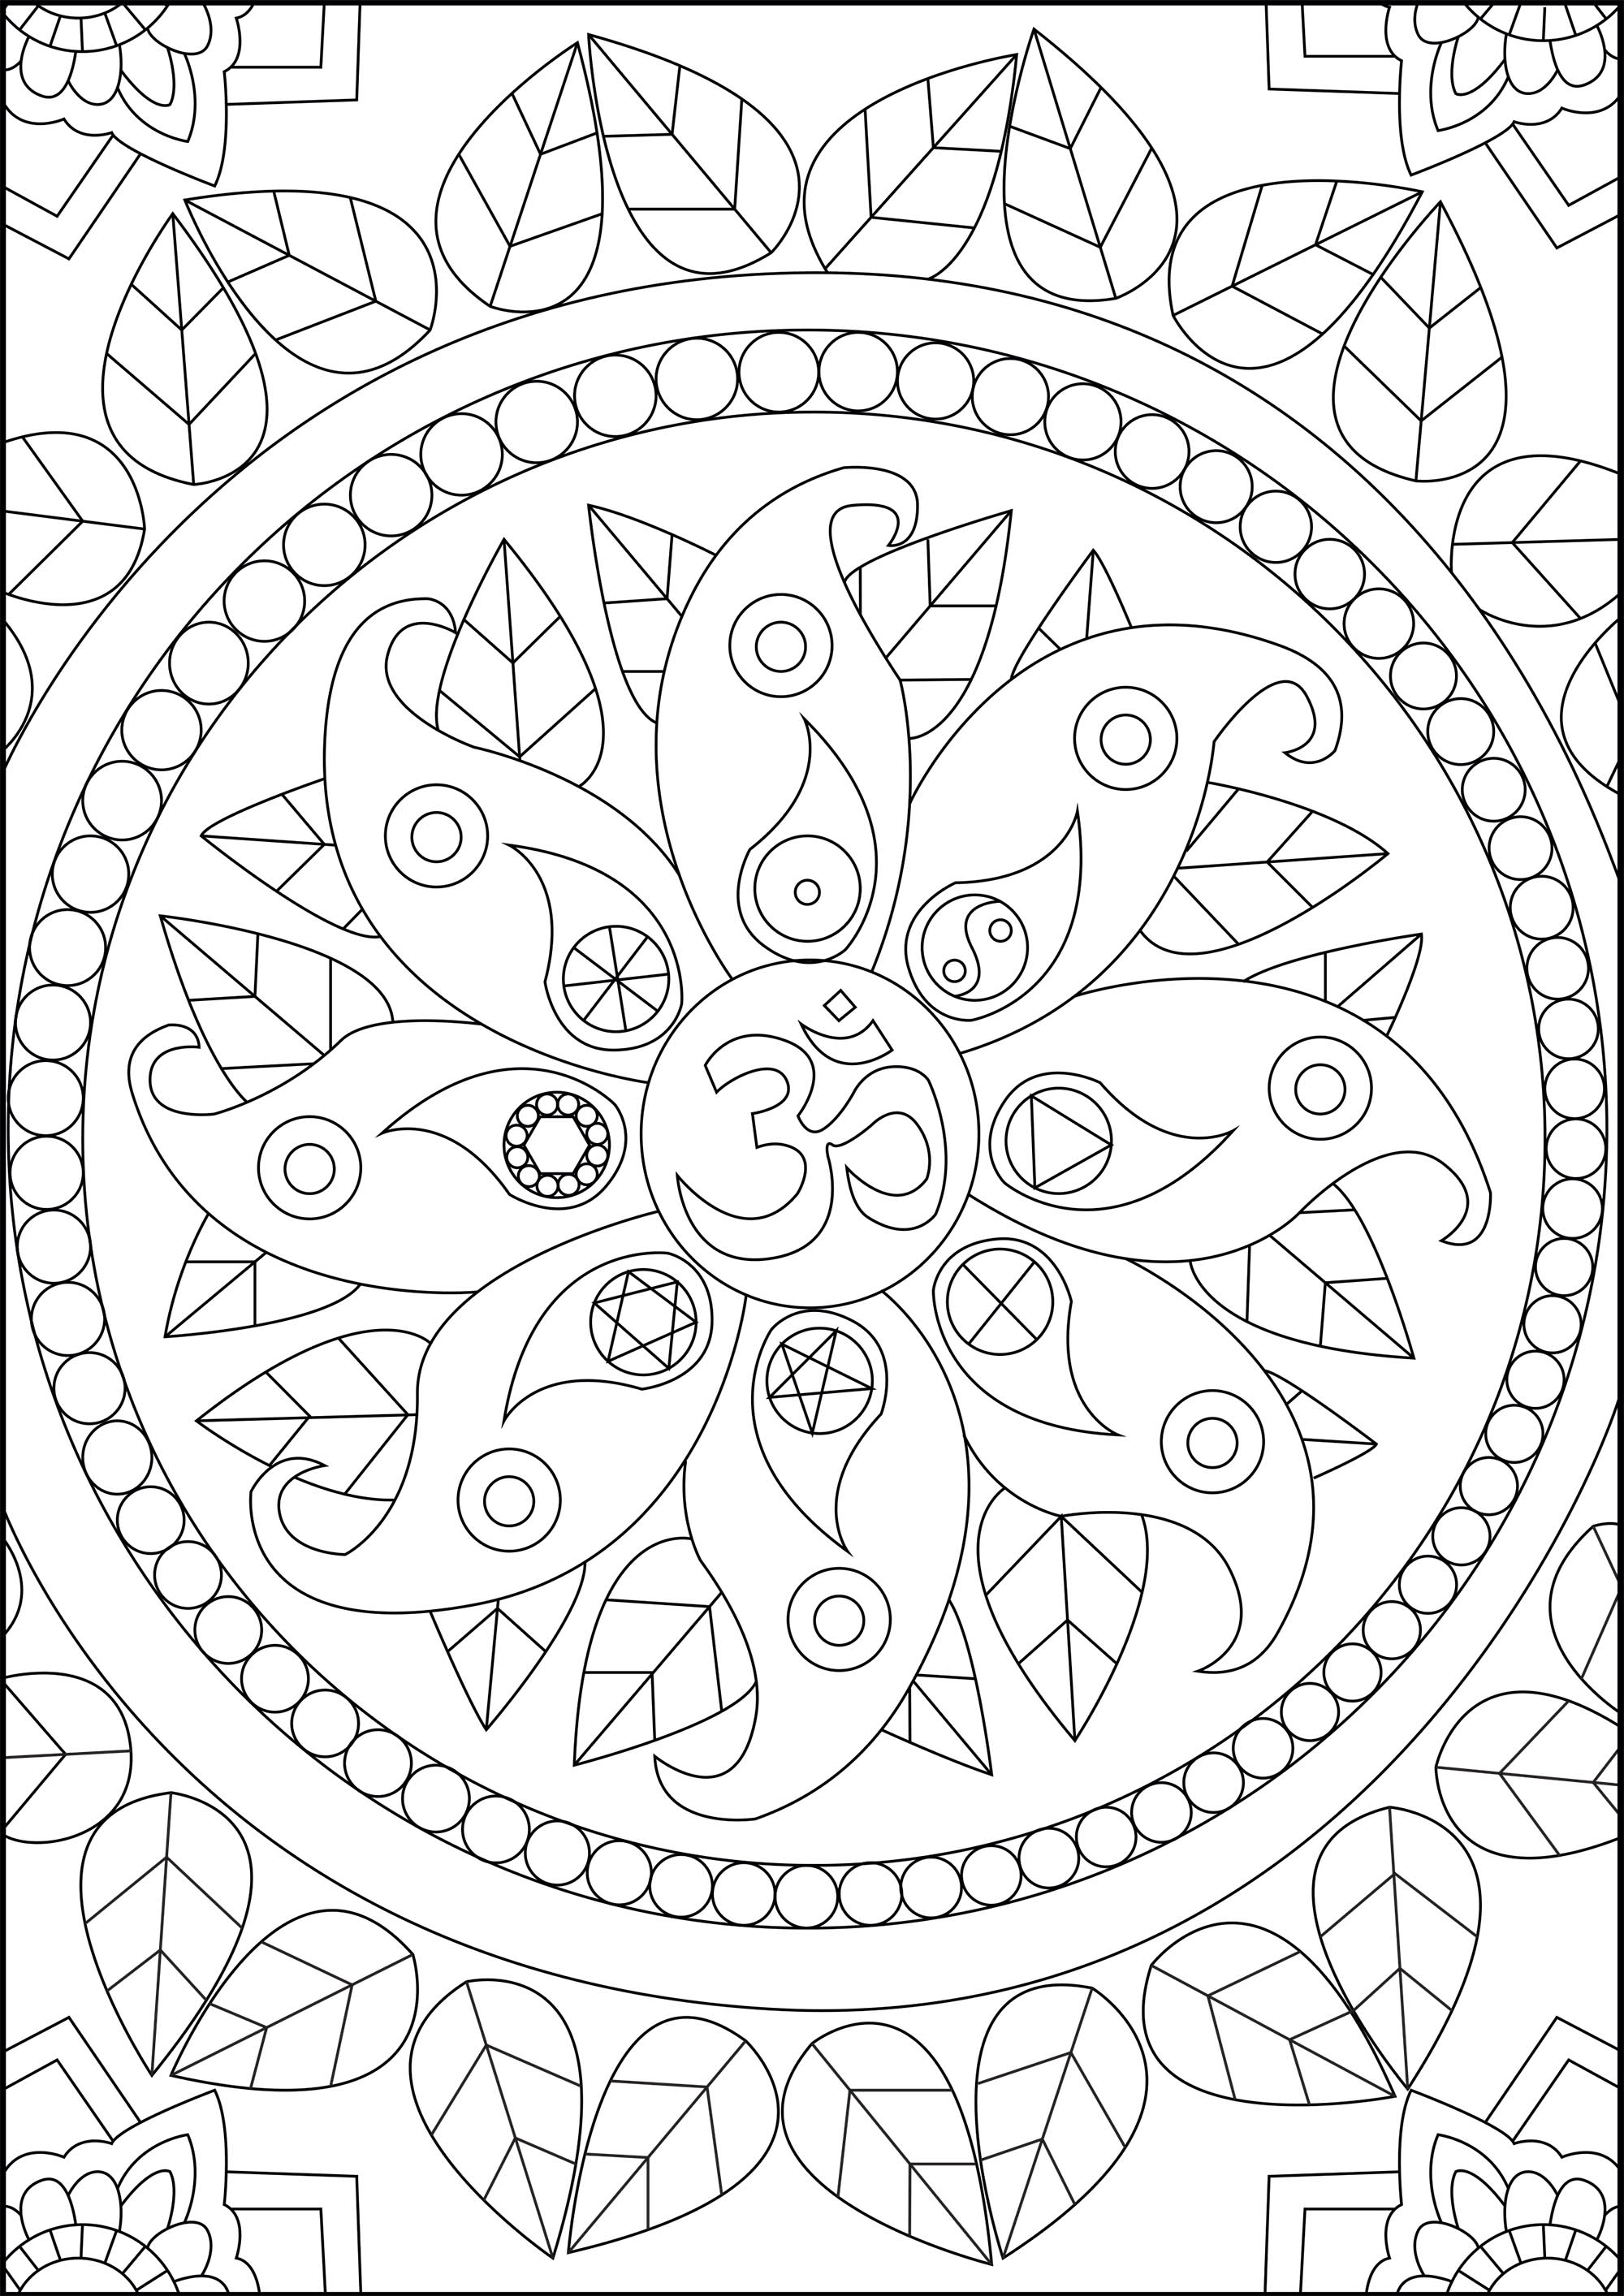 Download Peace symbols - Anti stress Adult Coloring Pages